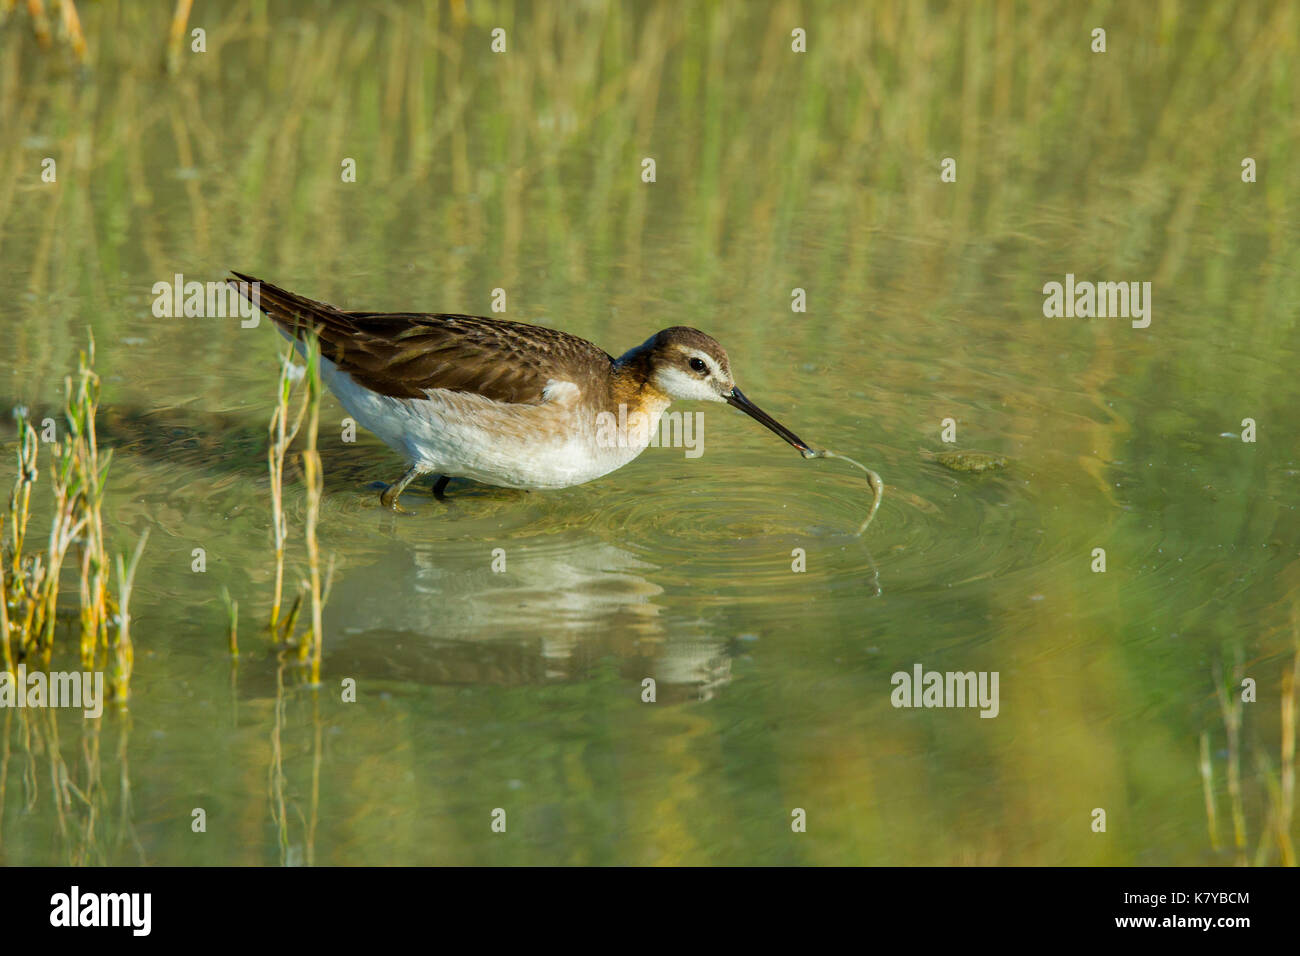 Wilson's Phalarope  Steganopus tricolor Walden, Colorado, United States 8 July 2017    Adult Male molting to winter plumage.     Scolopacidae Stock Photo